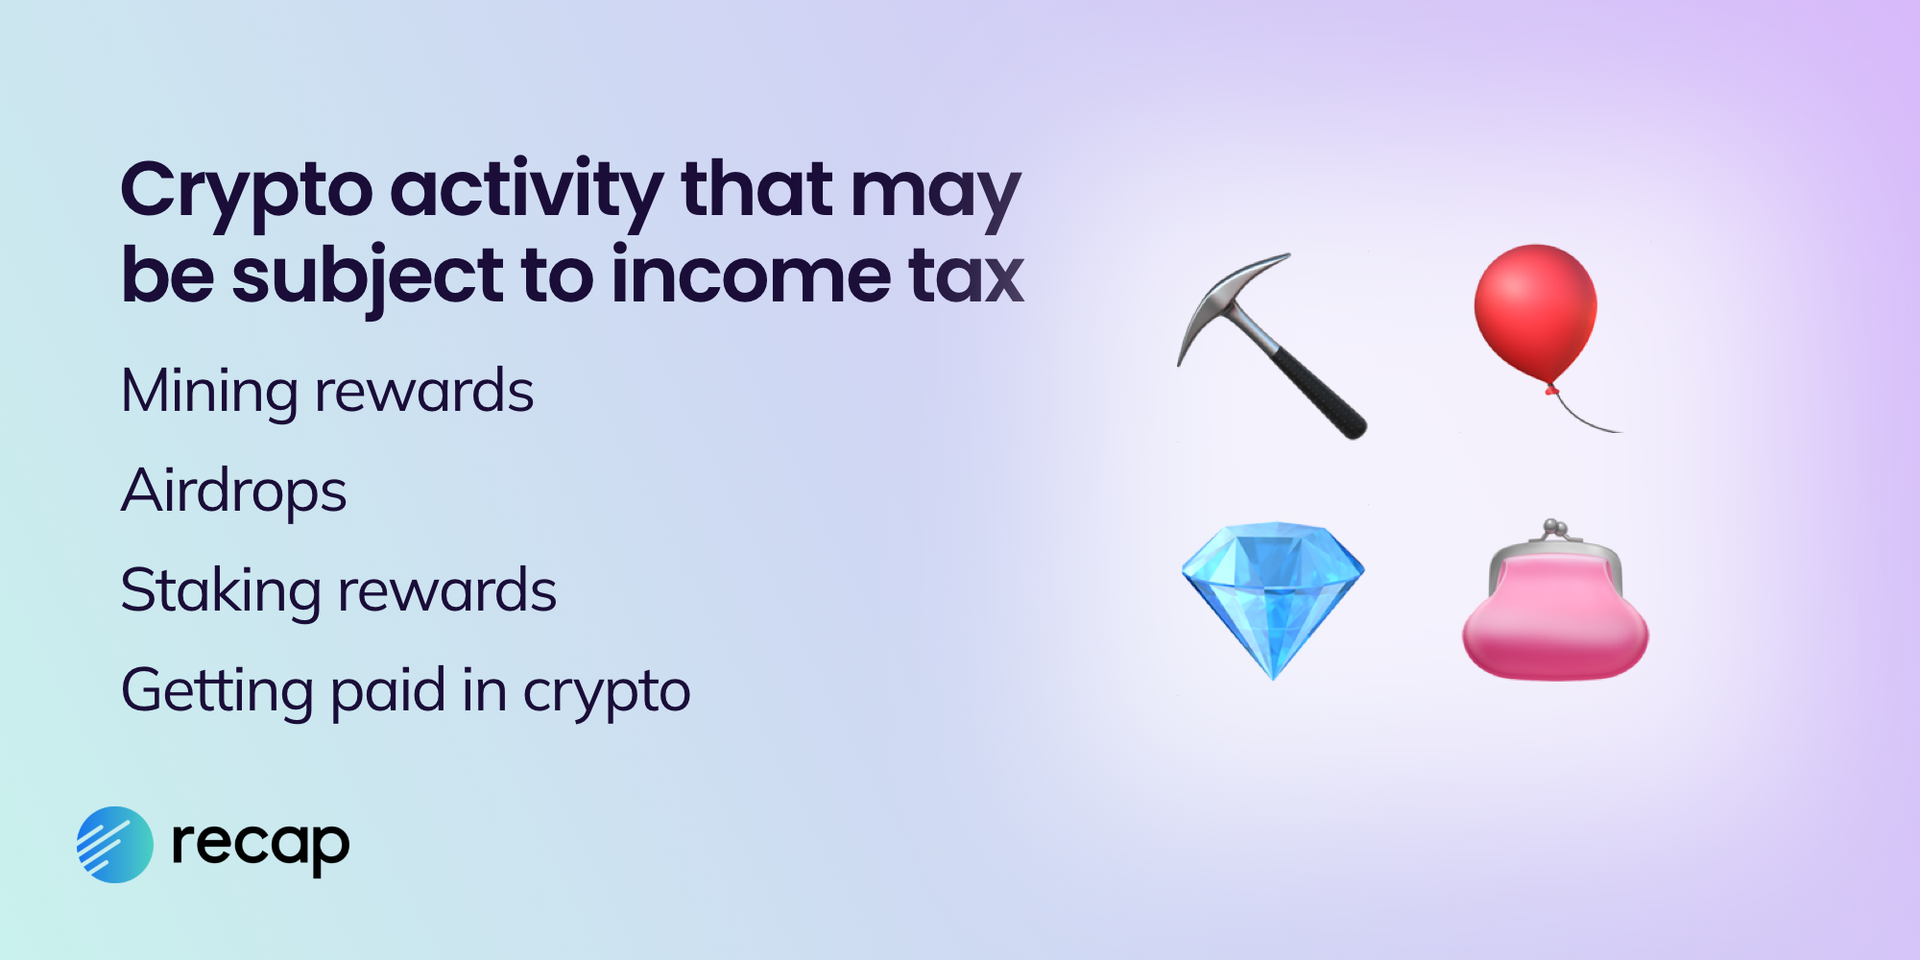 Infographic stating that in the US, mining rewards, airdrops, staking rewards and getting paid in crypto may be subject to income tax